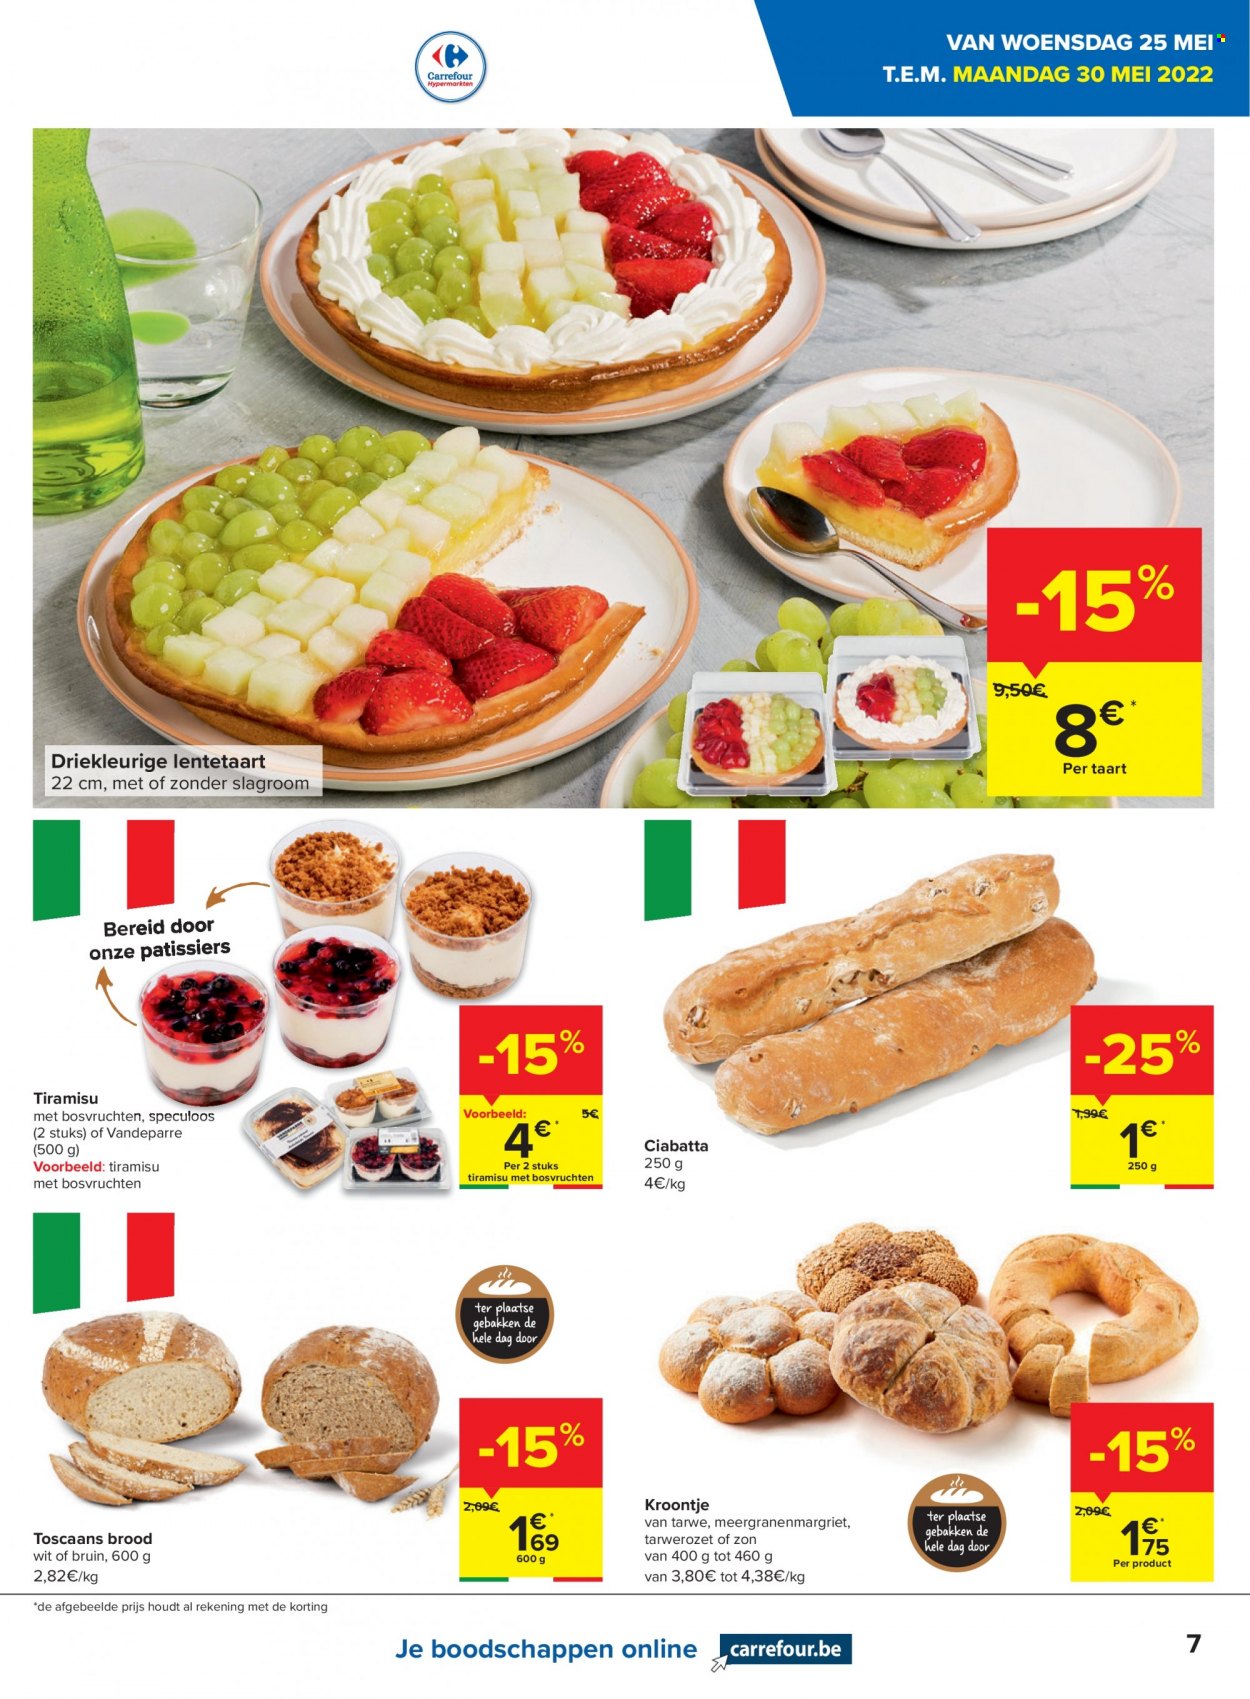 Catalogue Carrefour hypermarkt - 24.5.2022 - 30.5.2022. Page 7.